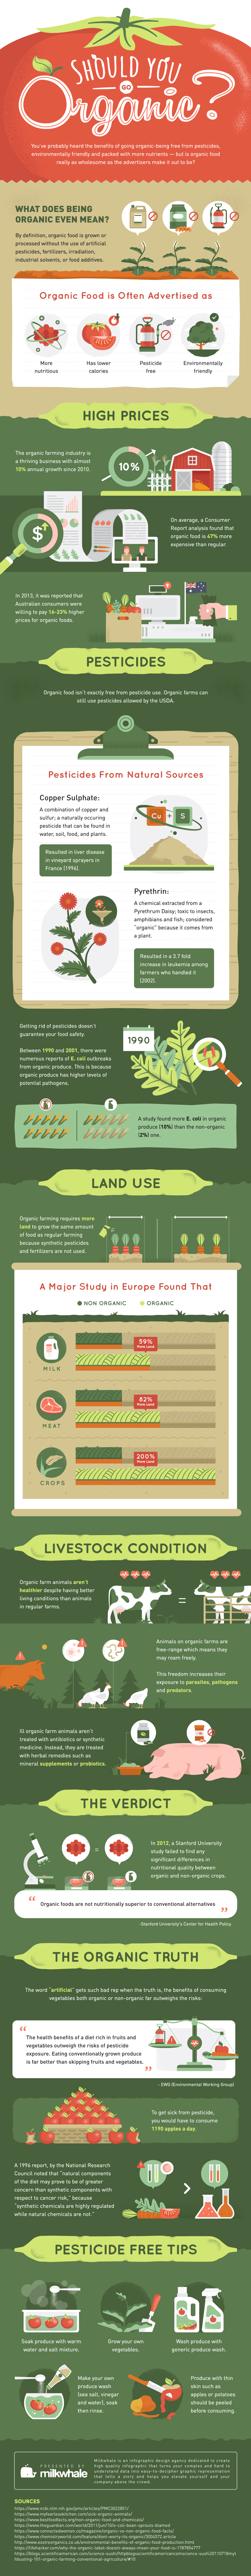 Infographic for The Organic Truth: Should You Go Organic?